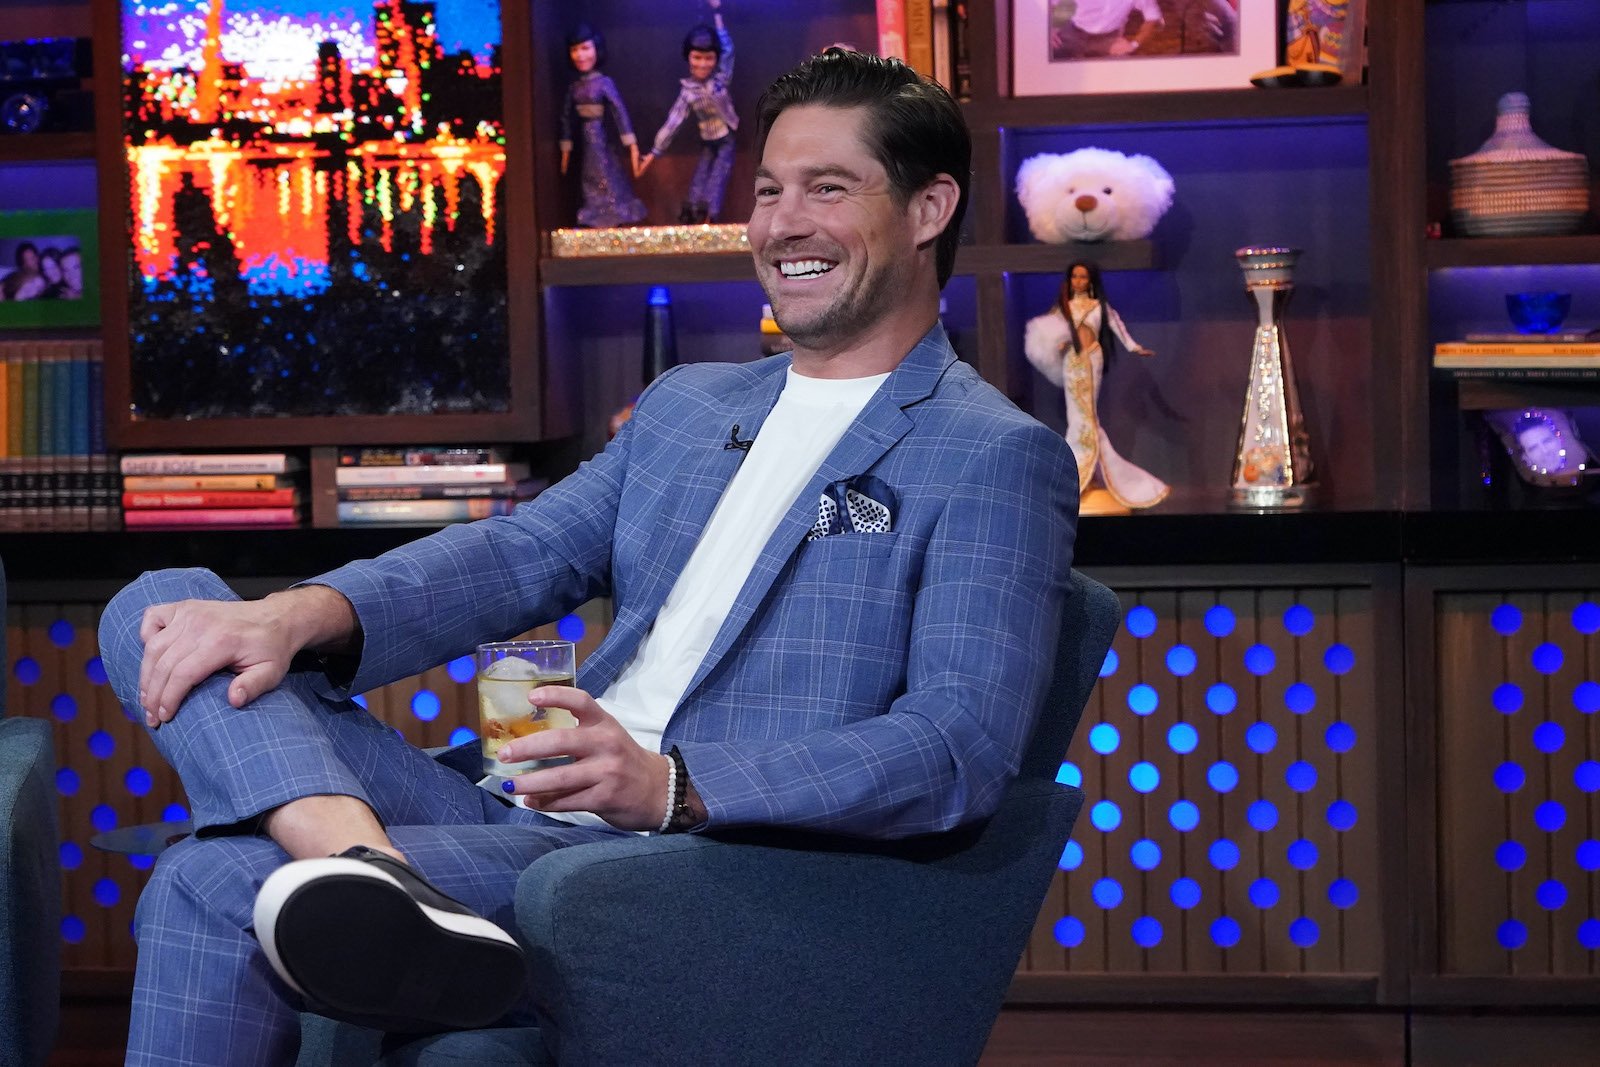 Craig Conover from 'Southern Charm' holds a cocktail and smiles while at 'WWHL'